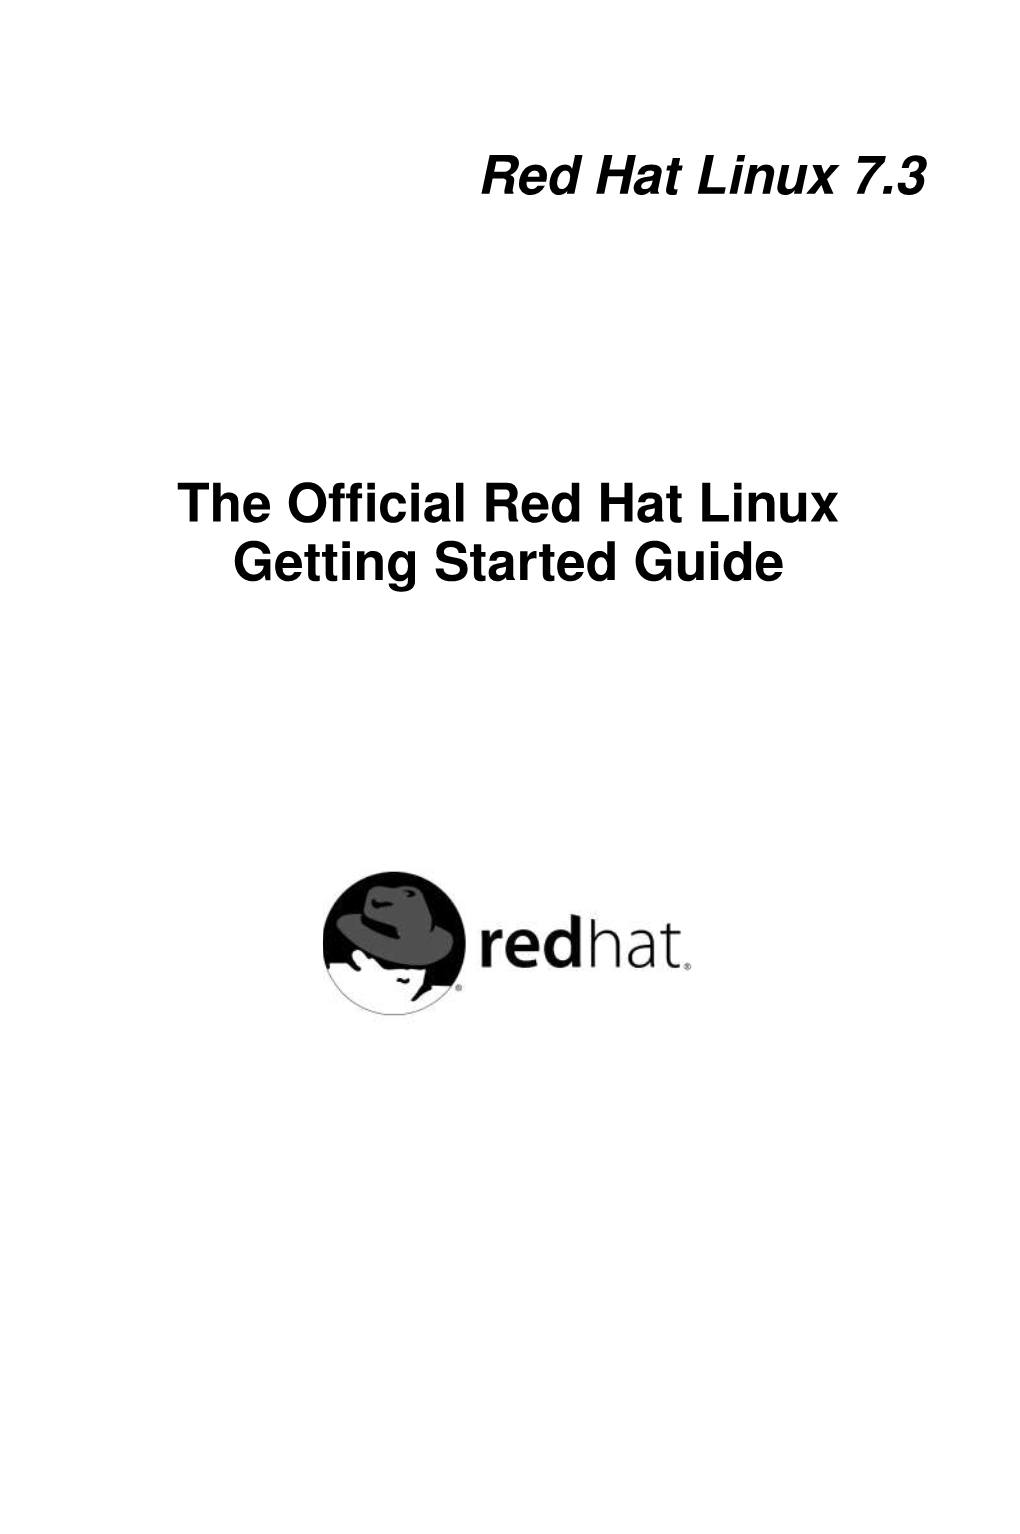 Red Hat Linux 7.3 the Official Red Hat